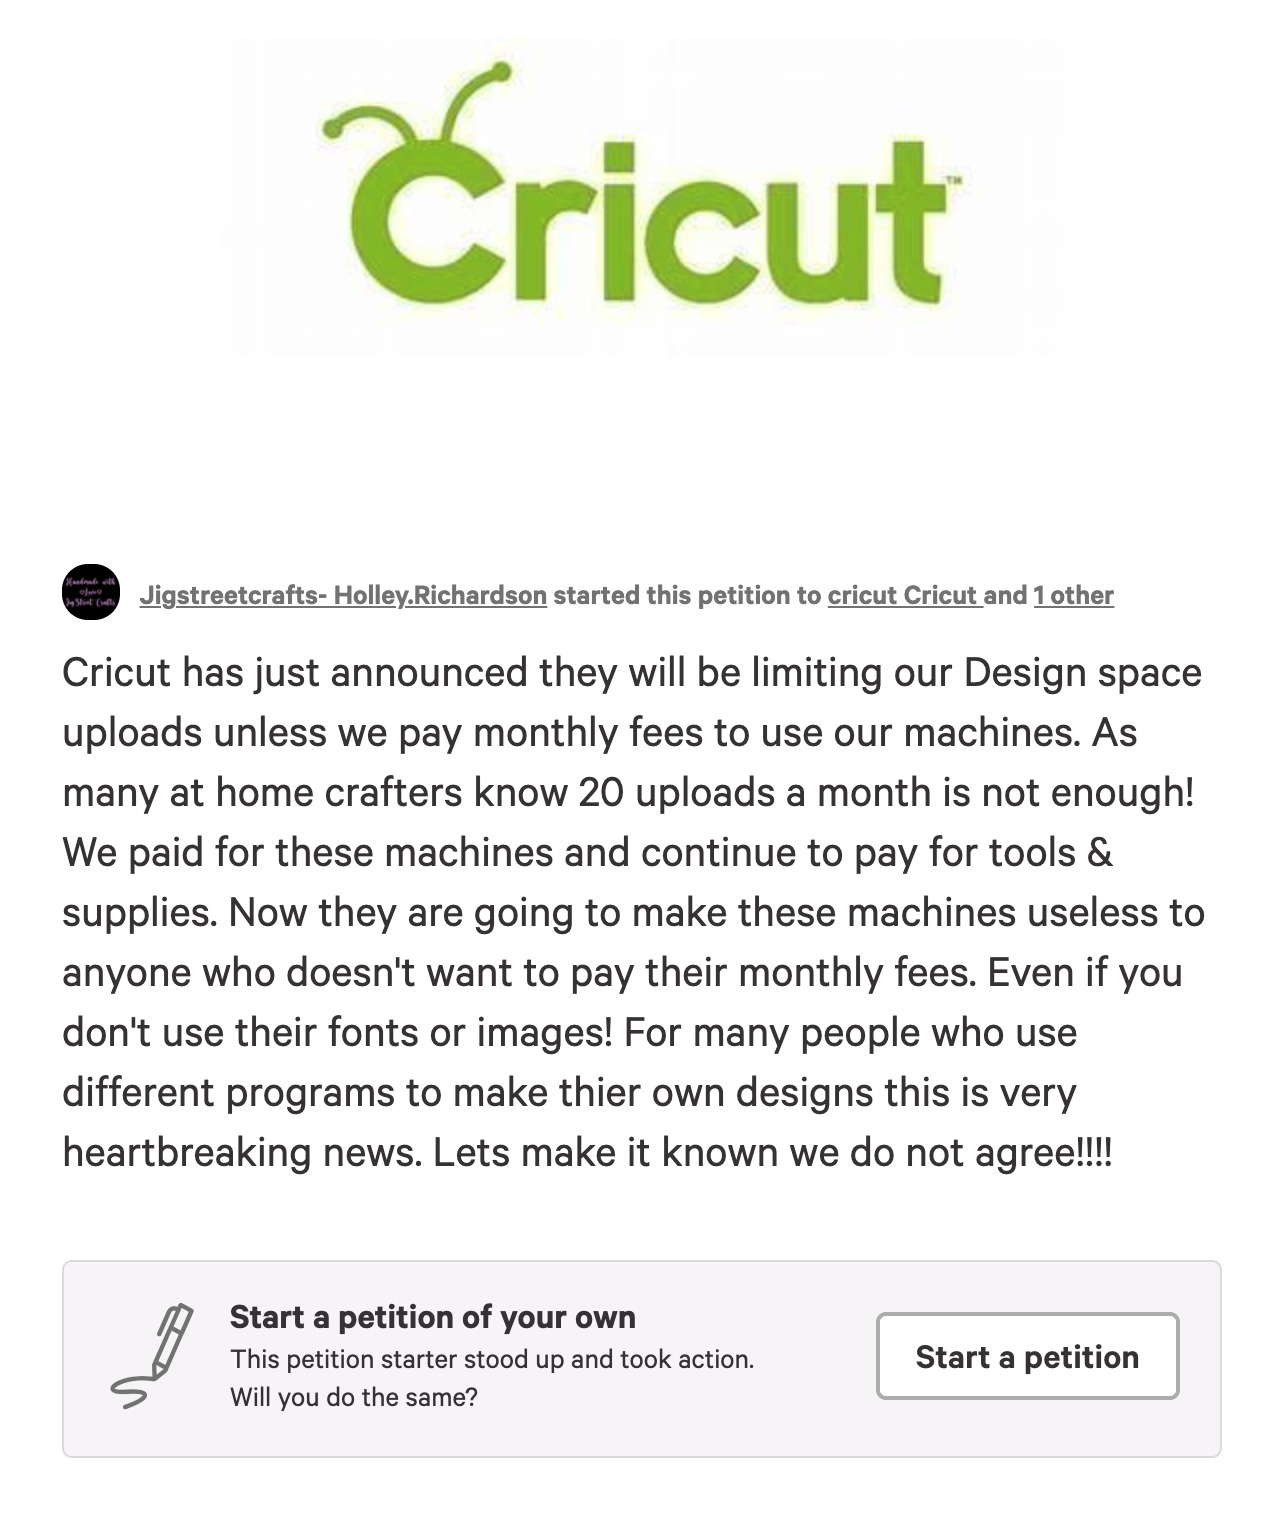 A community of crafters forced Cricut to revert their new subscription policy.